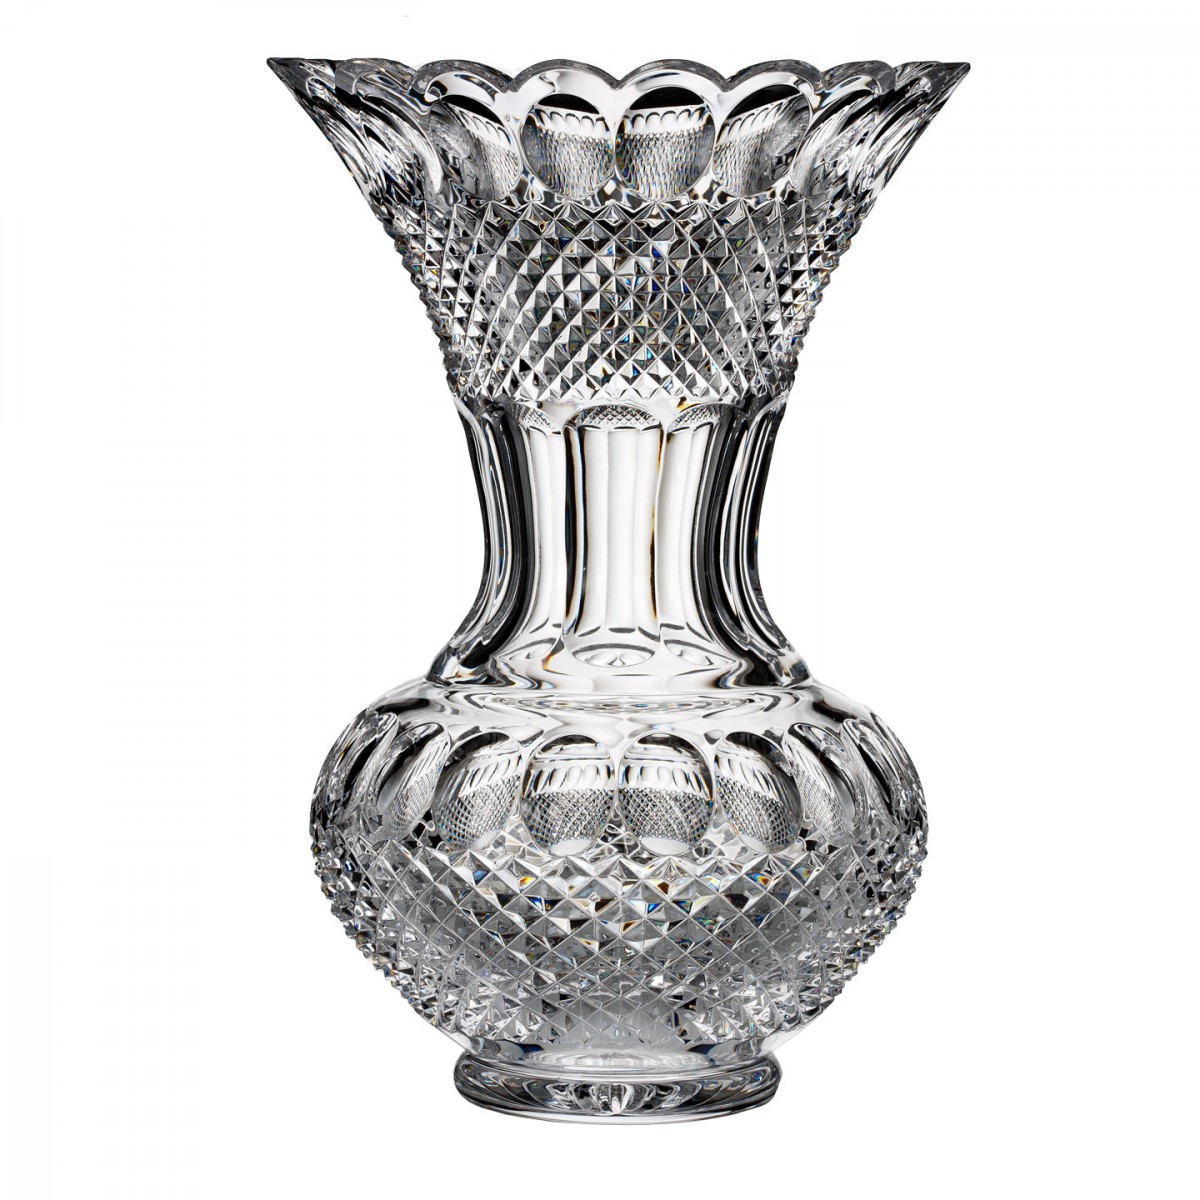 13 Lovable Waterford Marquis Markham Vase 2024 free download waterford marquis markham vase of designer studio fred curtis colleen vase limited edition of 250 intended for designer studio fred curtis colleen vase limited edition of 250